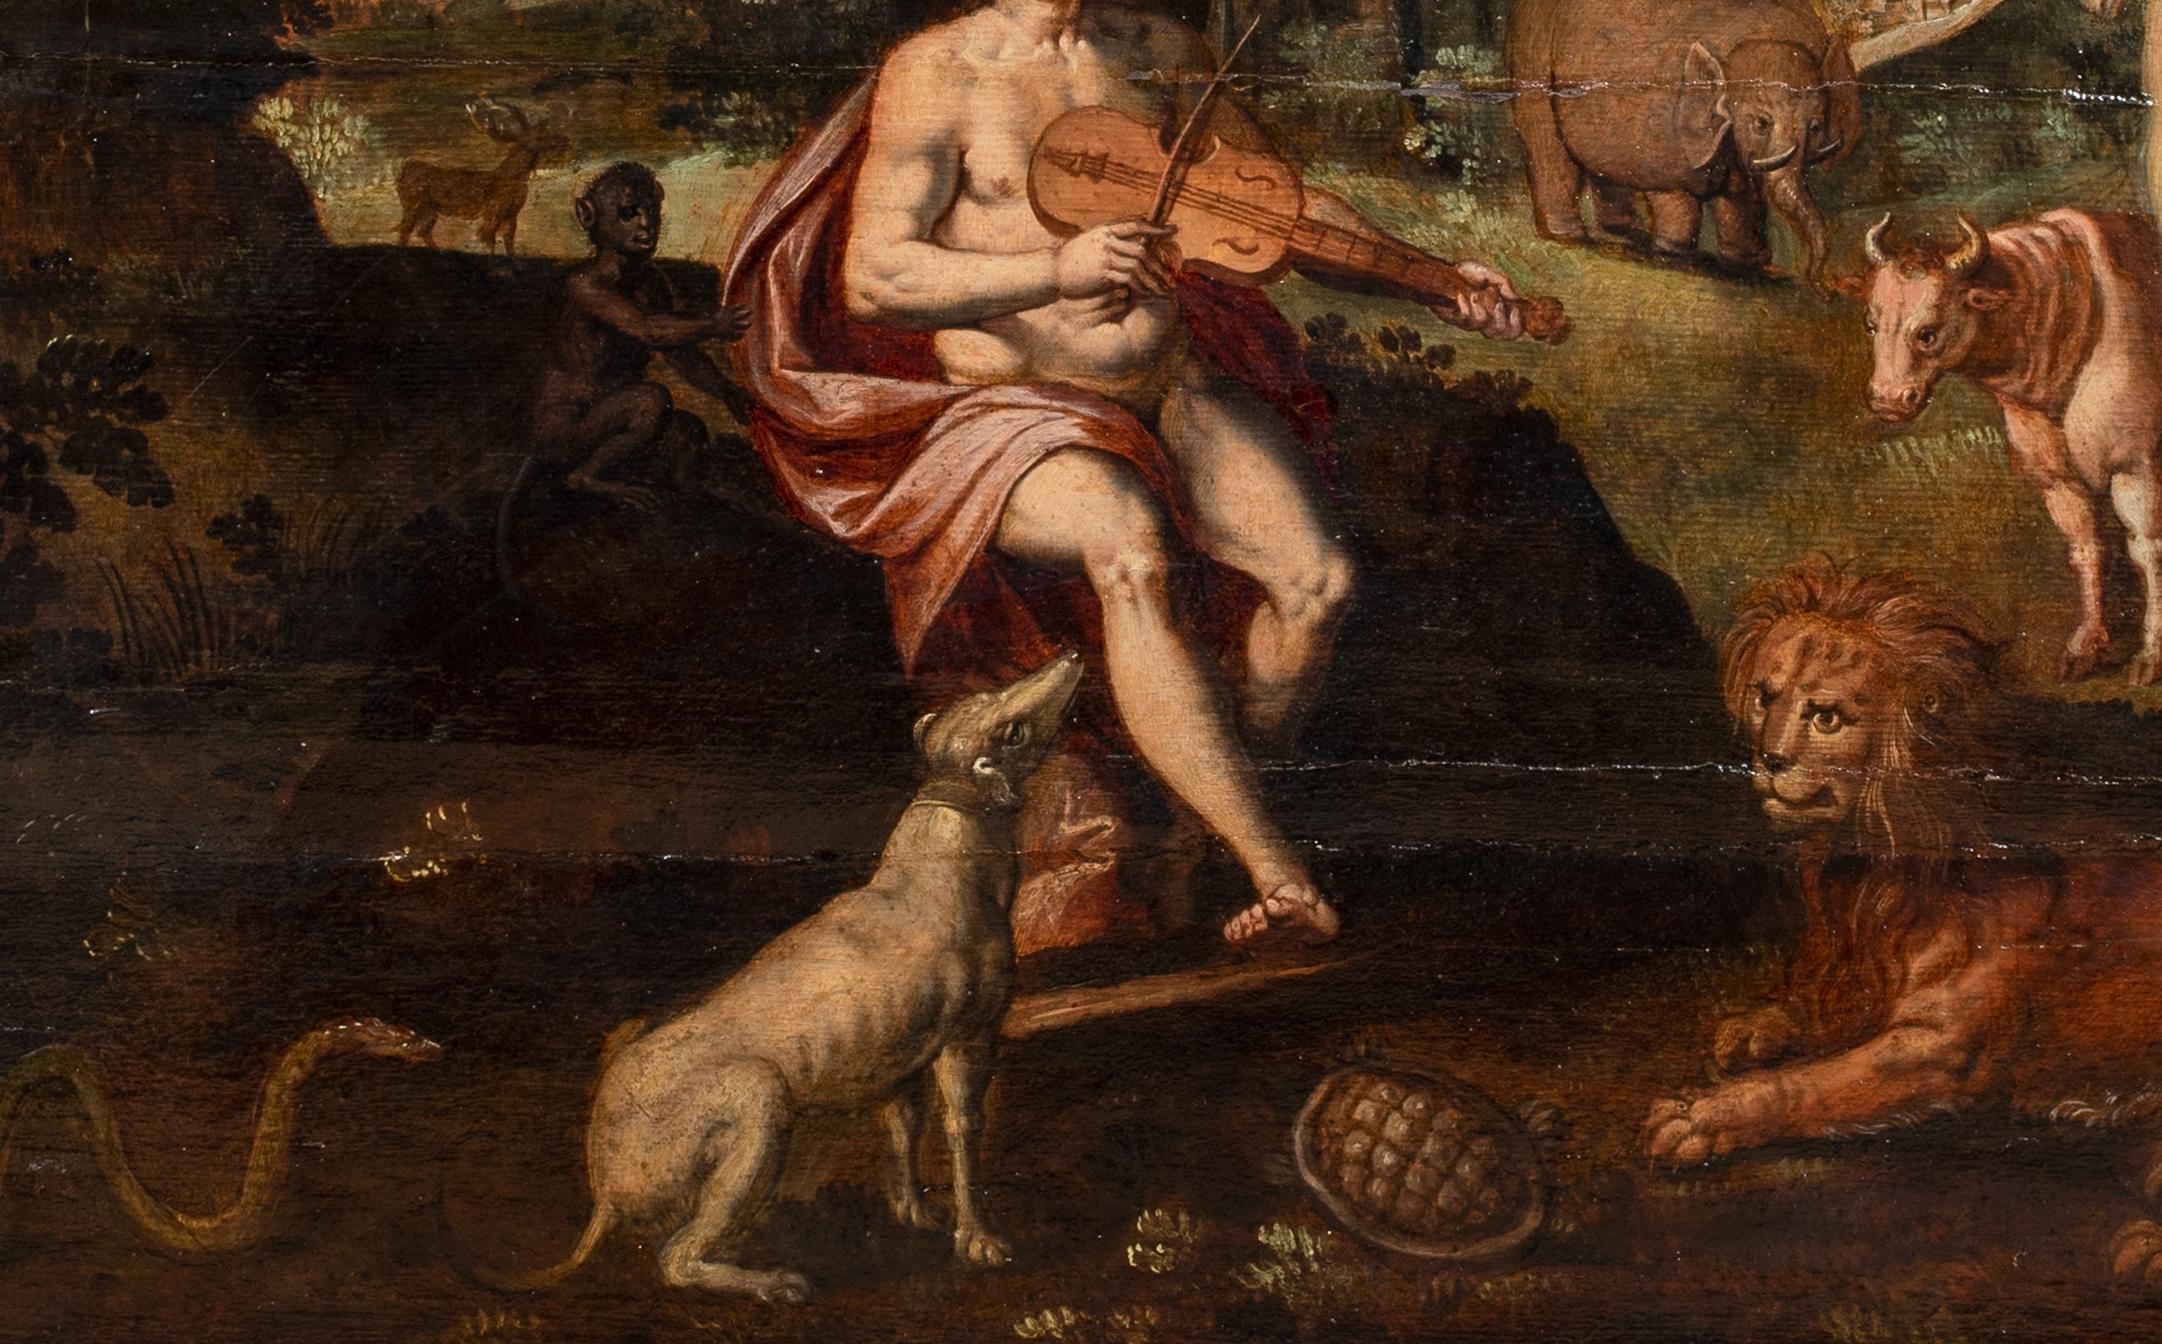 Orpheus Enchanting the Animals, 16th Century

Workshop of Frans Pourbus (1545-1581)

Huge 16th Century Flemish Old Master of Orpheus enchanting the animals, oil on panel from the workshop of Frans Pourbus. Important early and rare scene of Orpheus